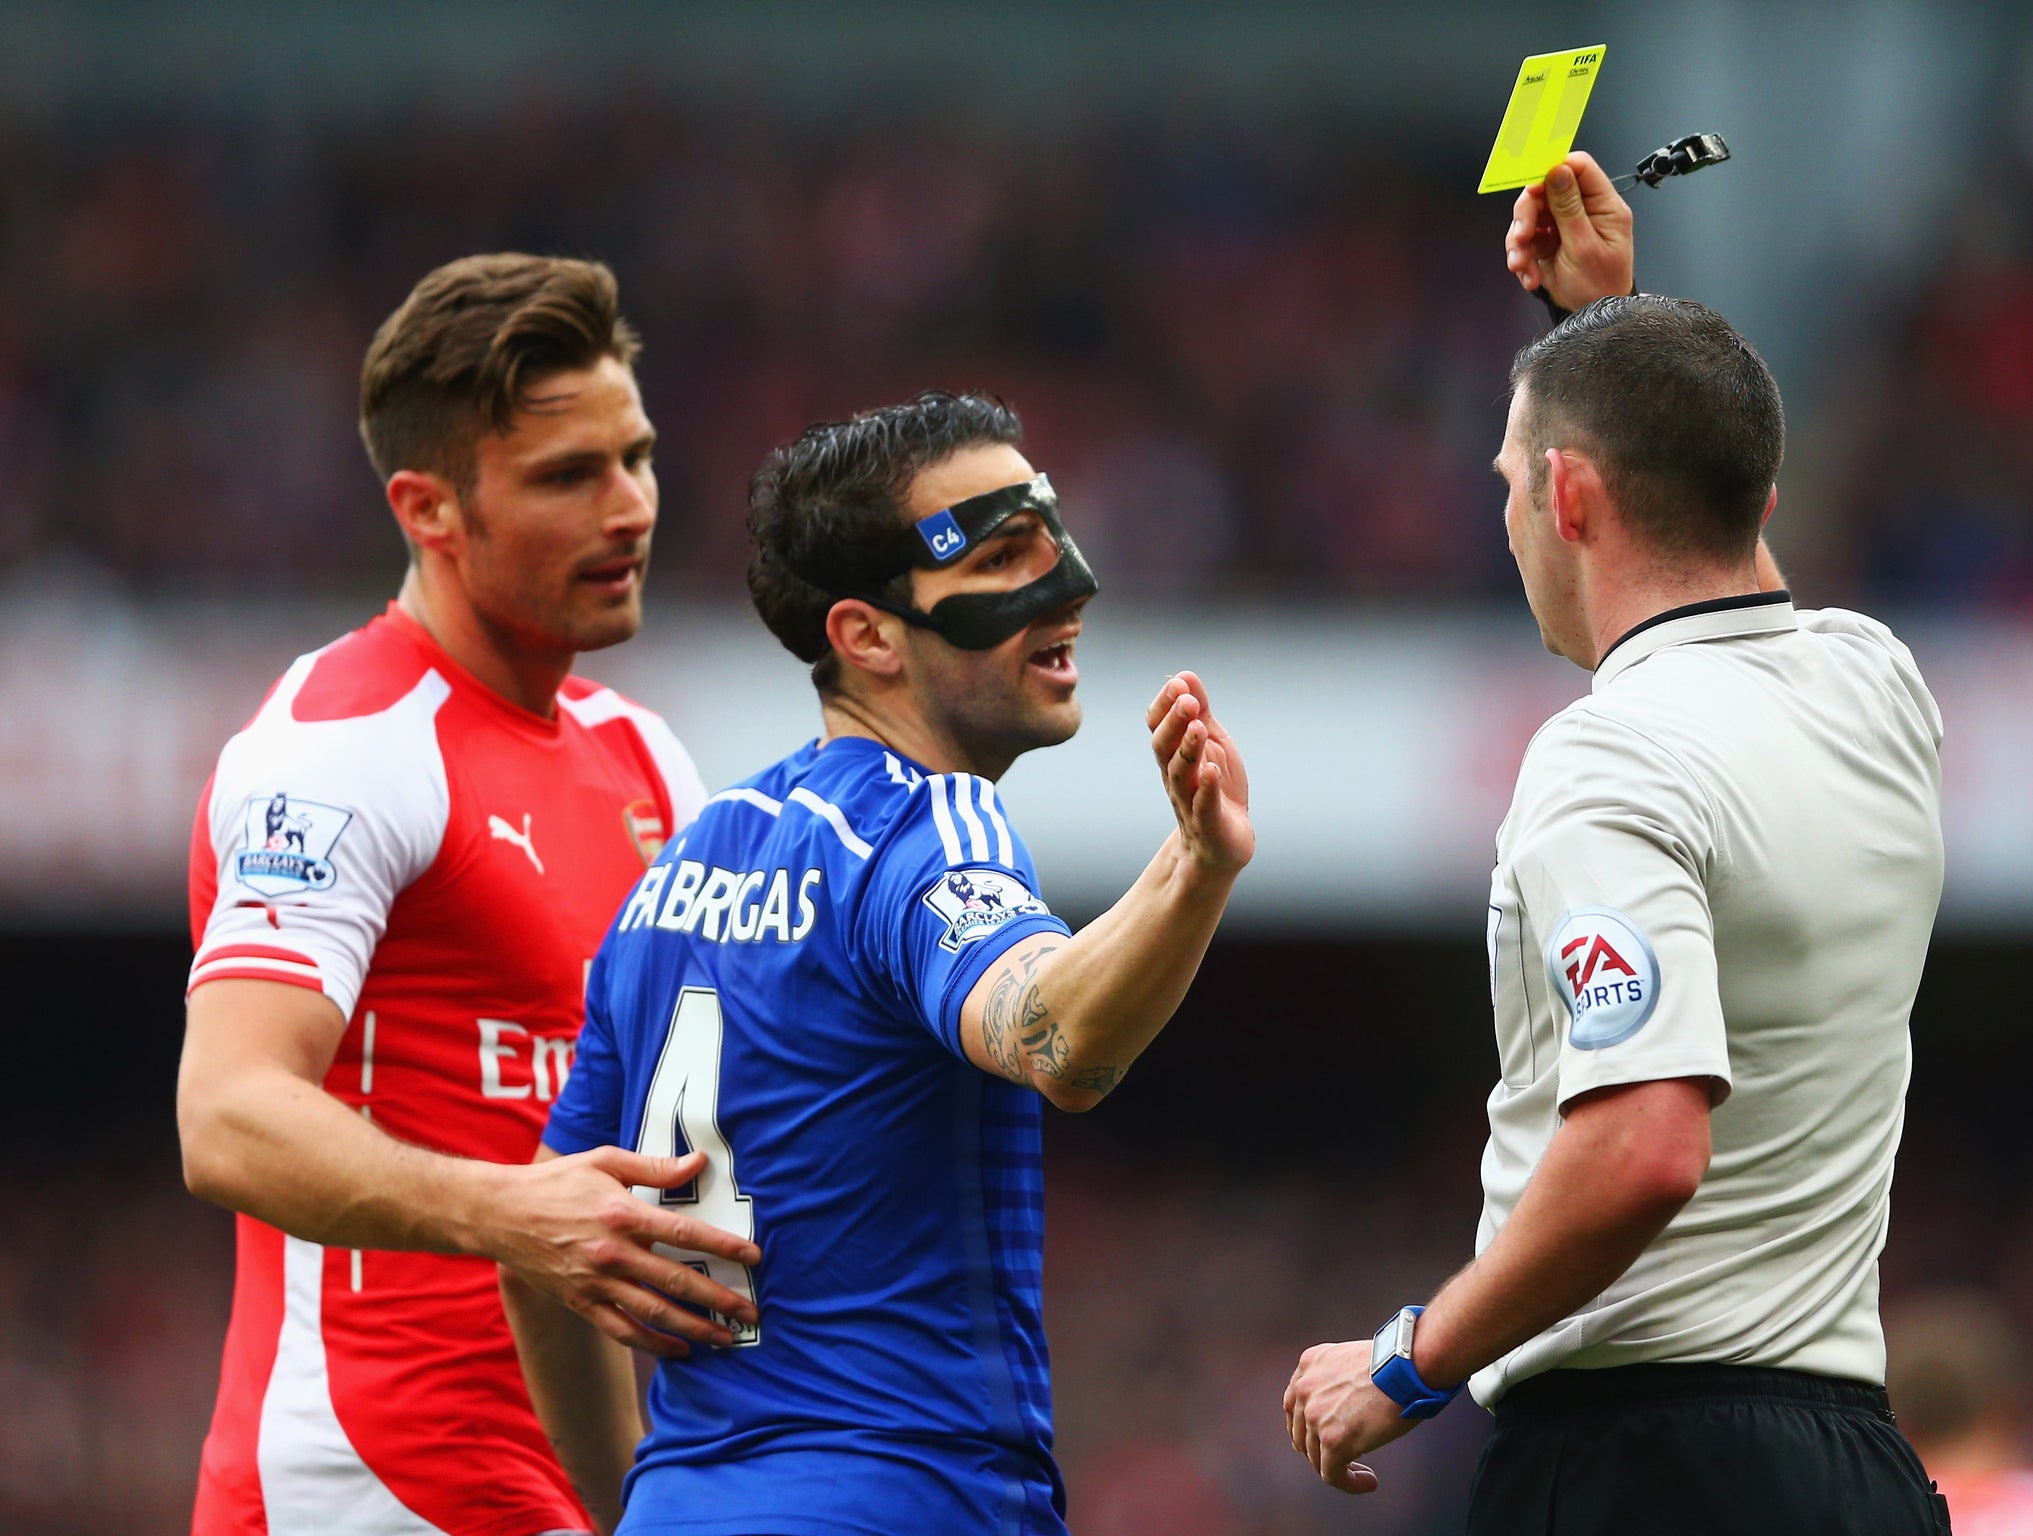 Cesc Fabregas is booked for diving